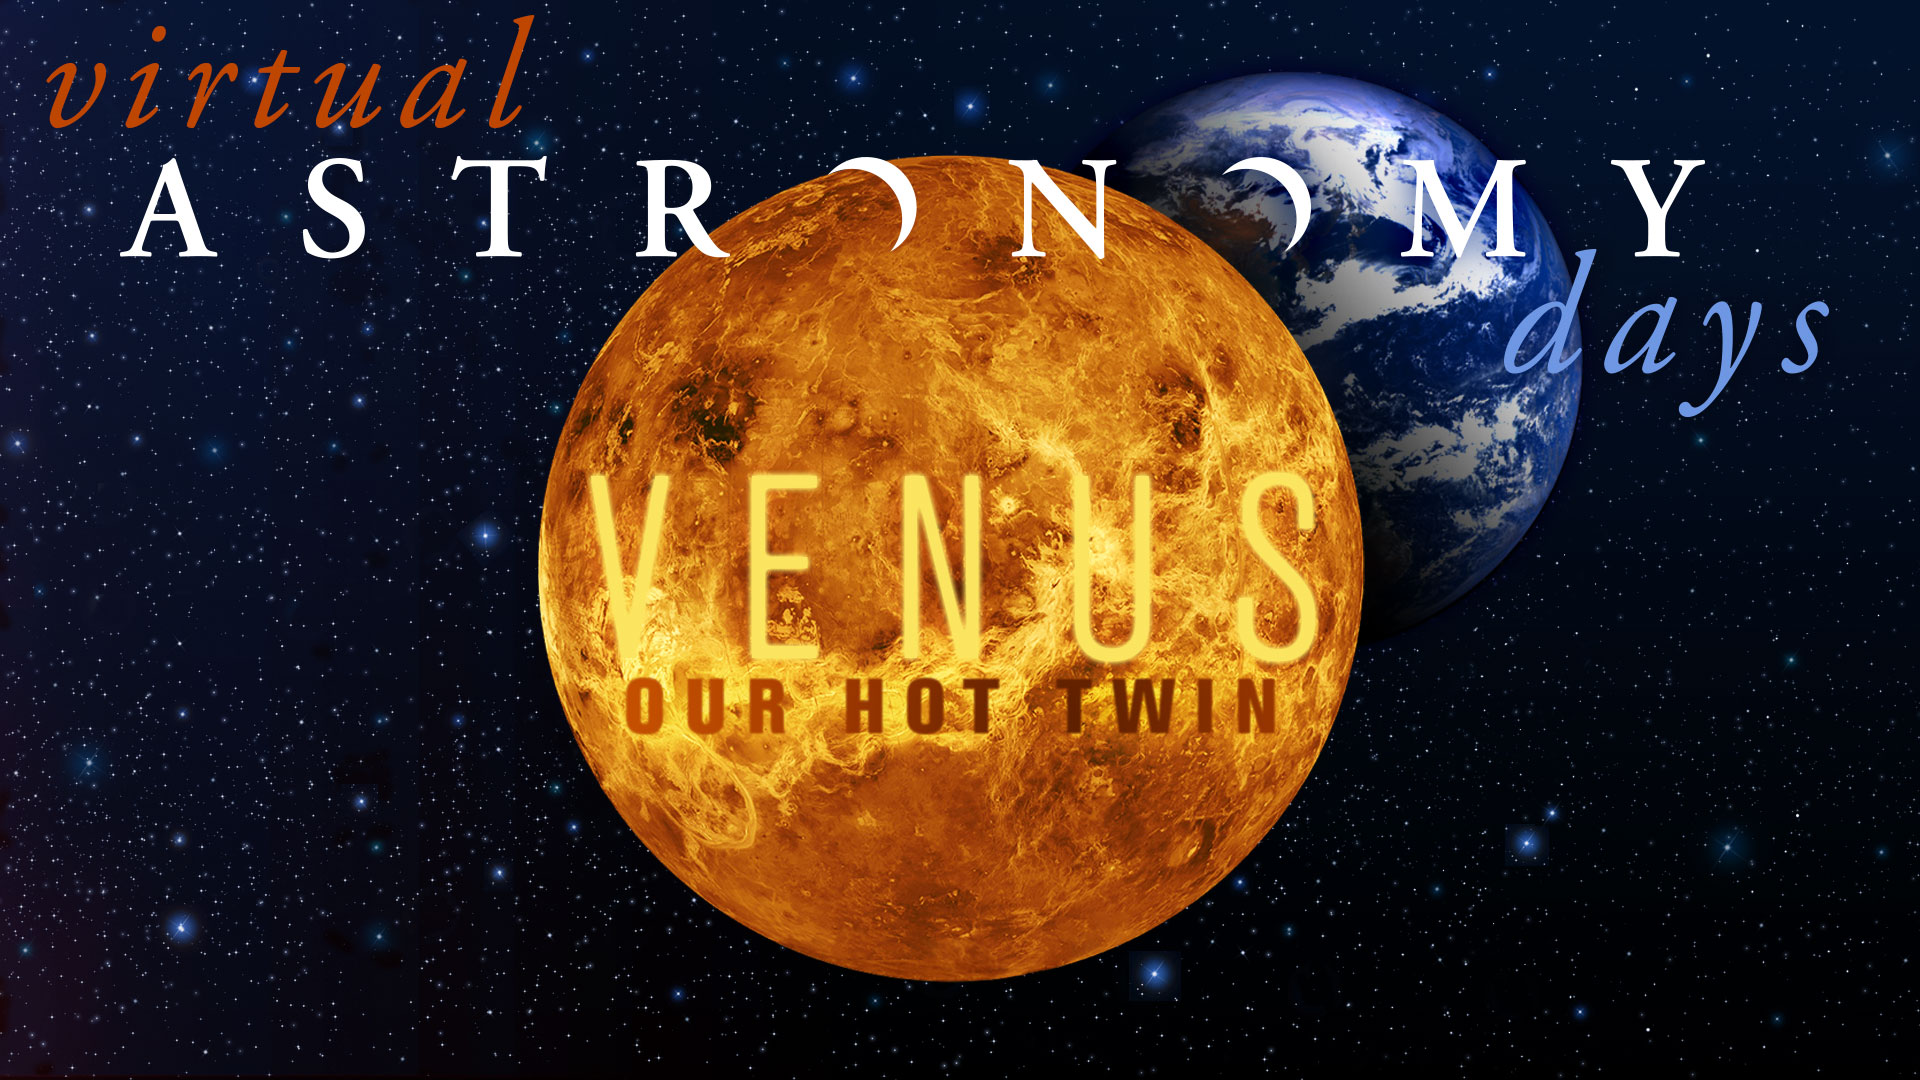 Astronomy Days: Venus, Our Hot Twin, January 24–30